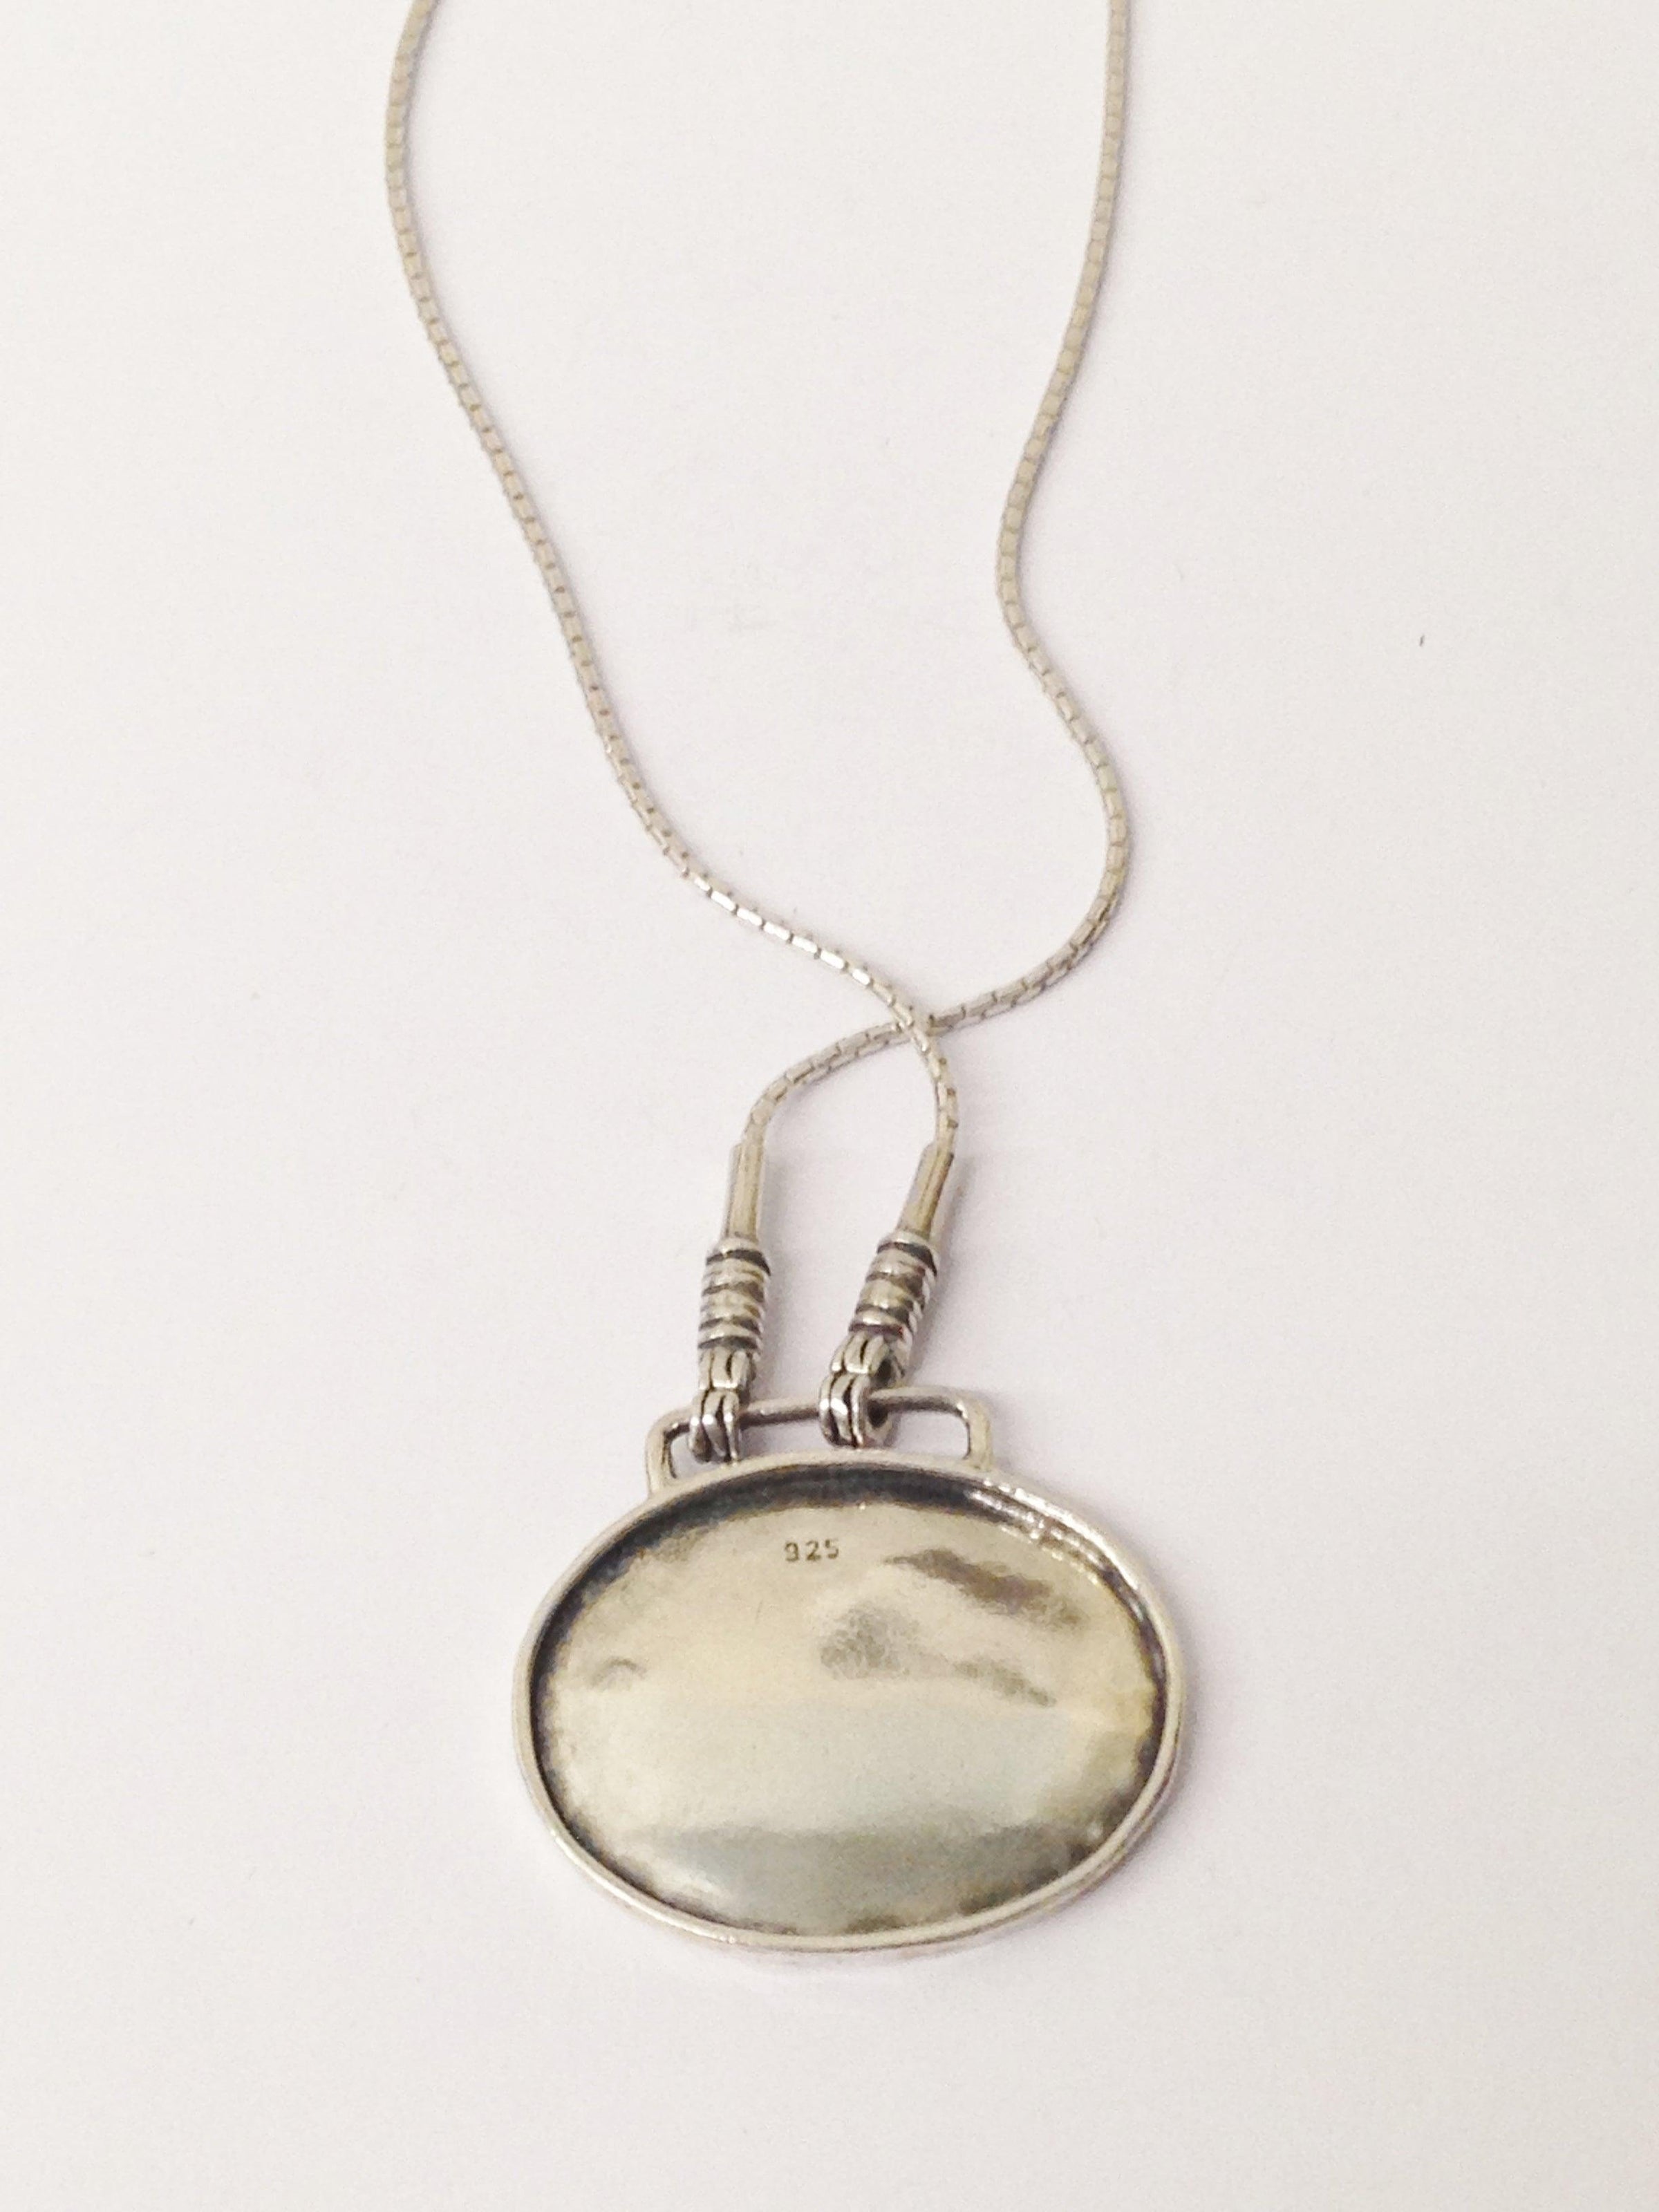 Silpada N1555 Oval Hammered .925 Sterling Silver Pendant Necklace - Hers and His Treasures